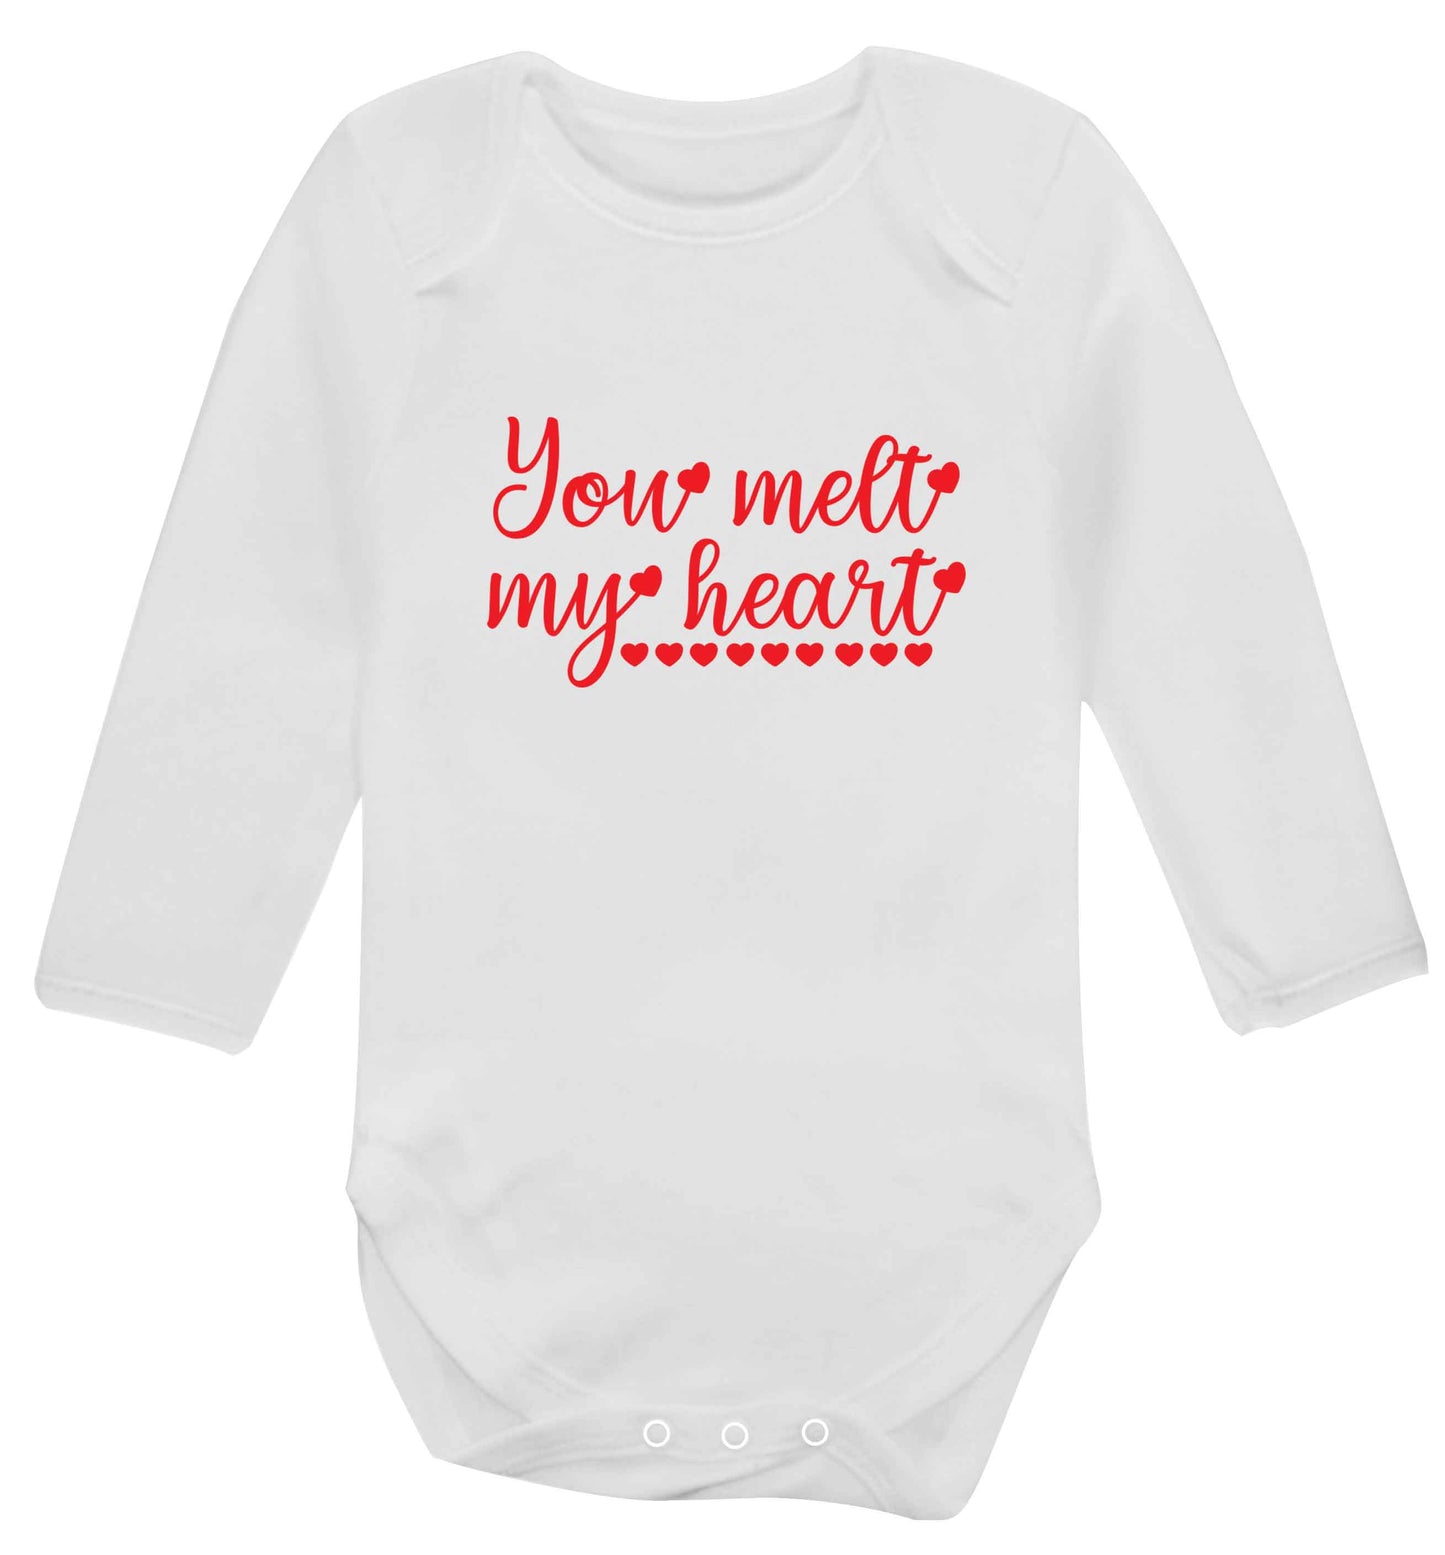 You melt my heart baby vest long sleeved white 6-12 months